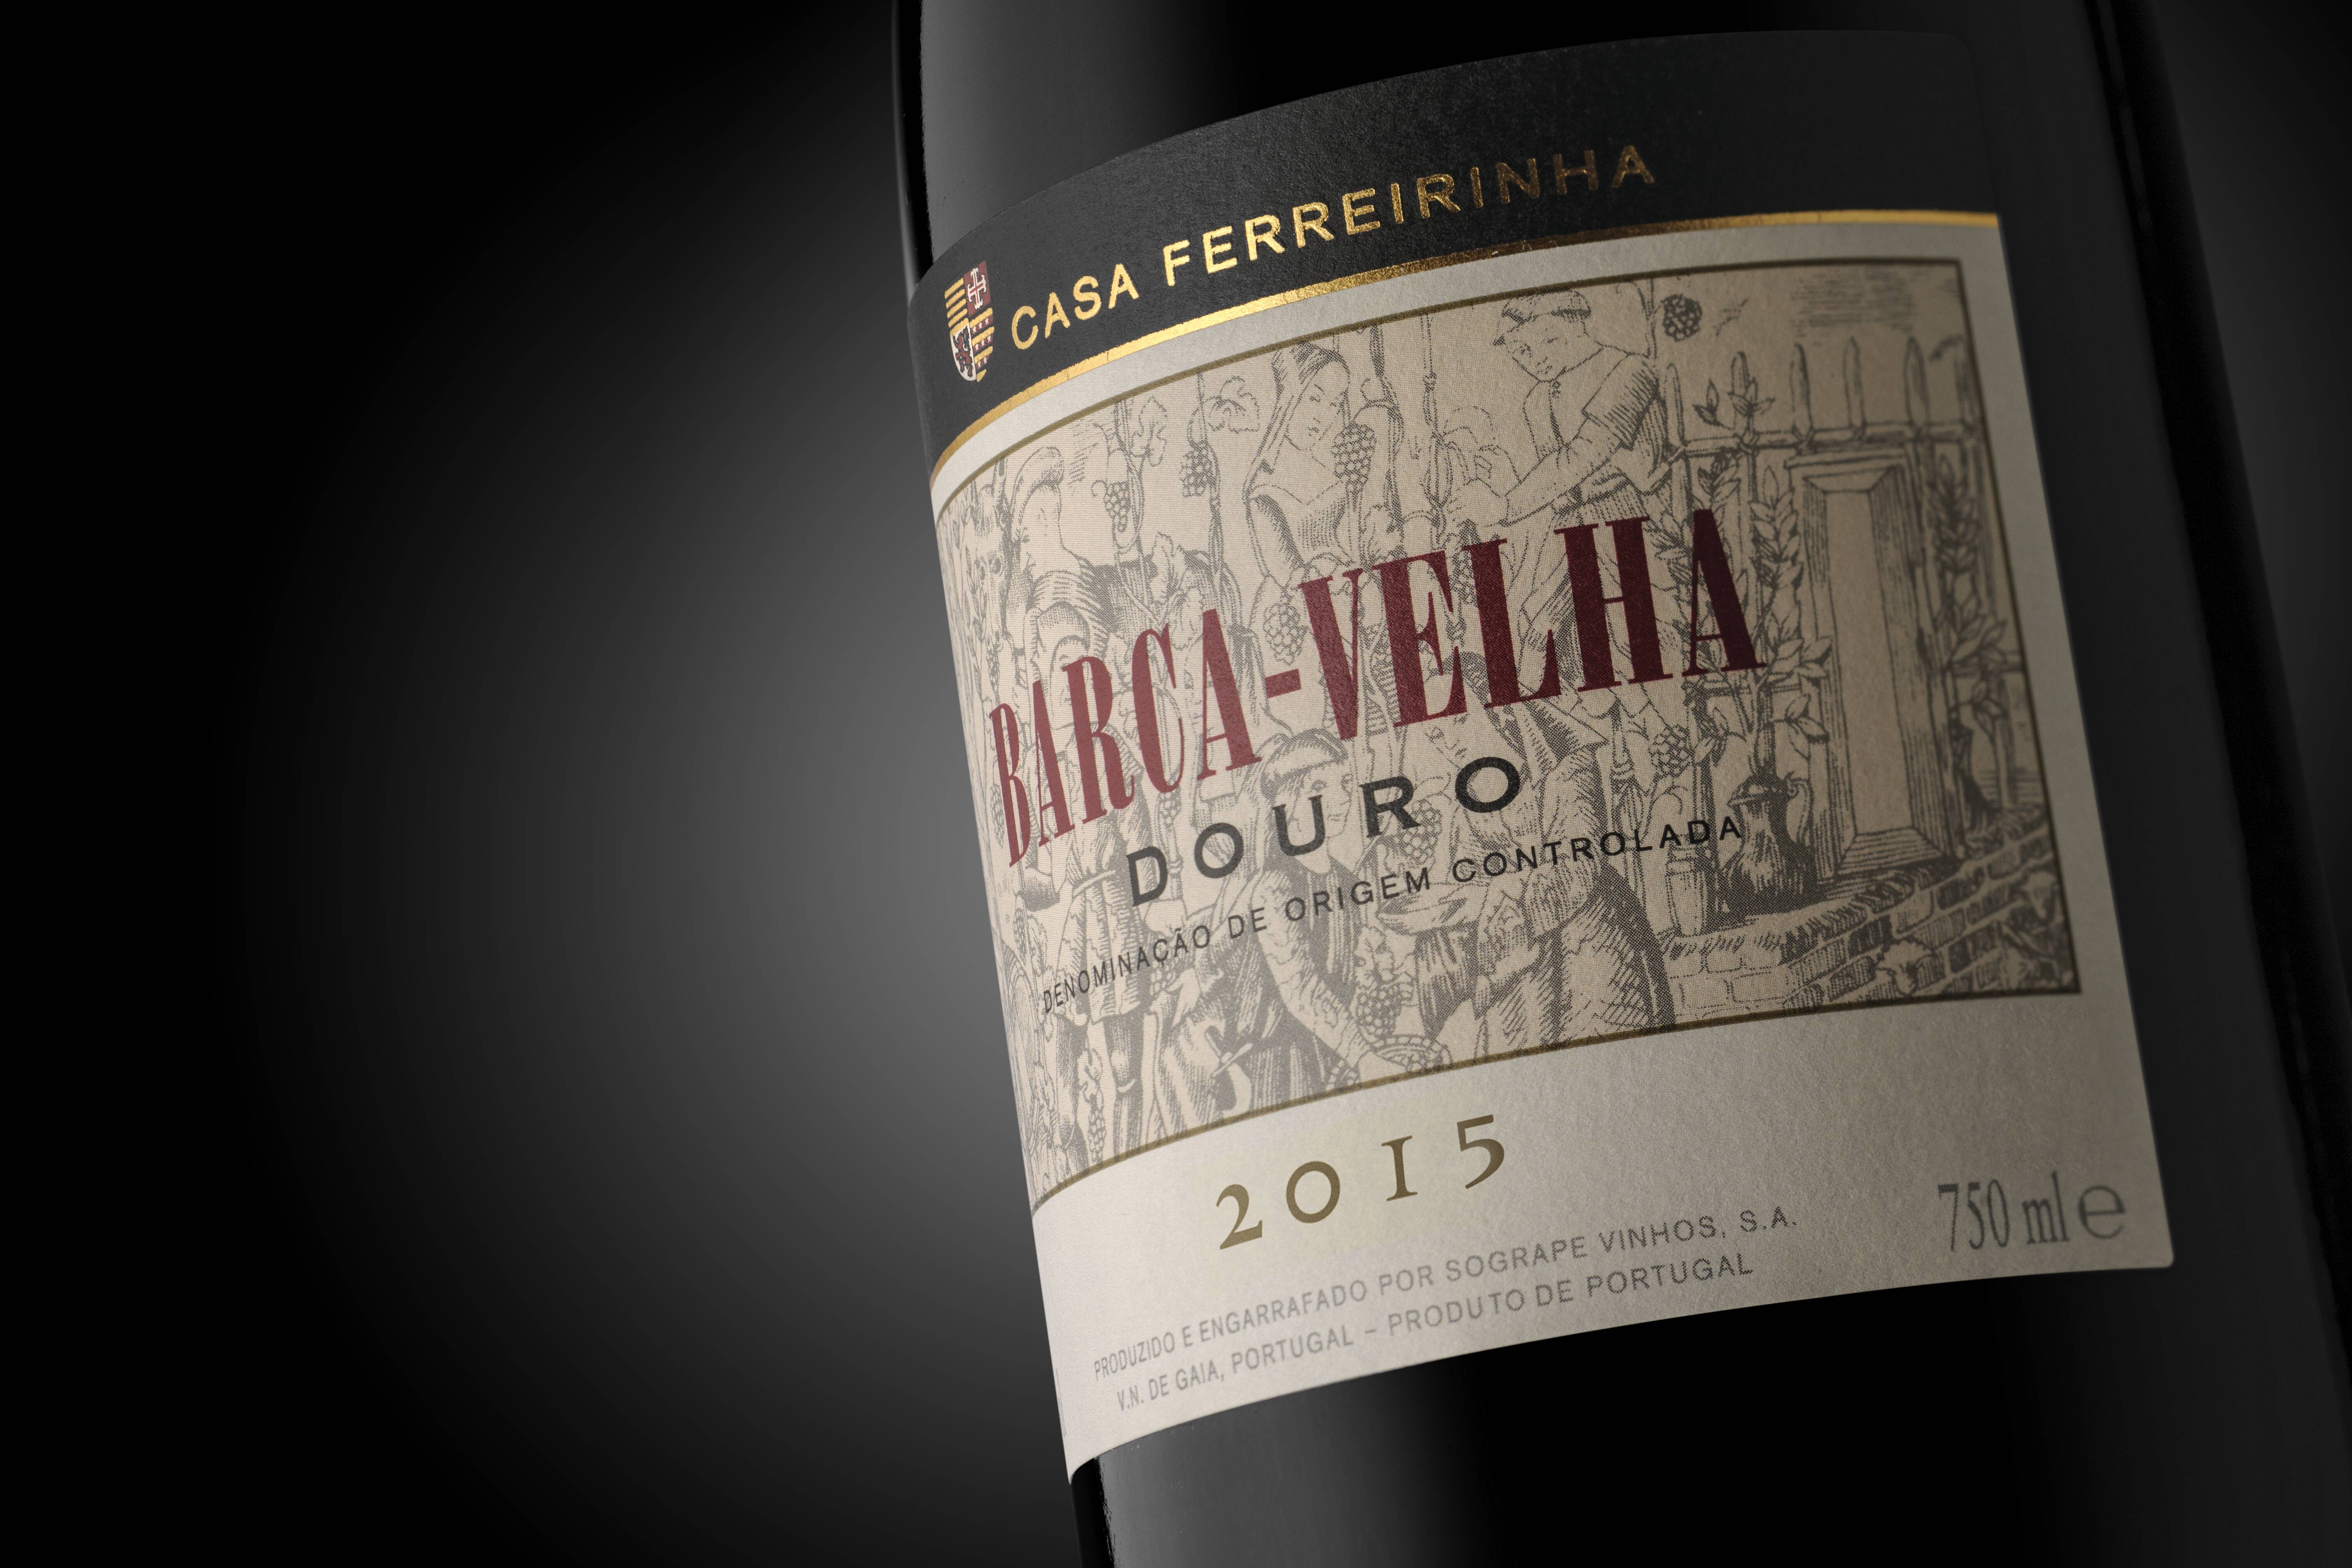 An emblematic Douro wine